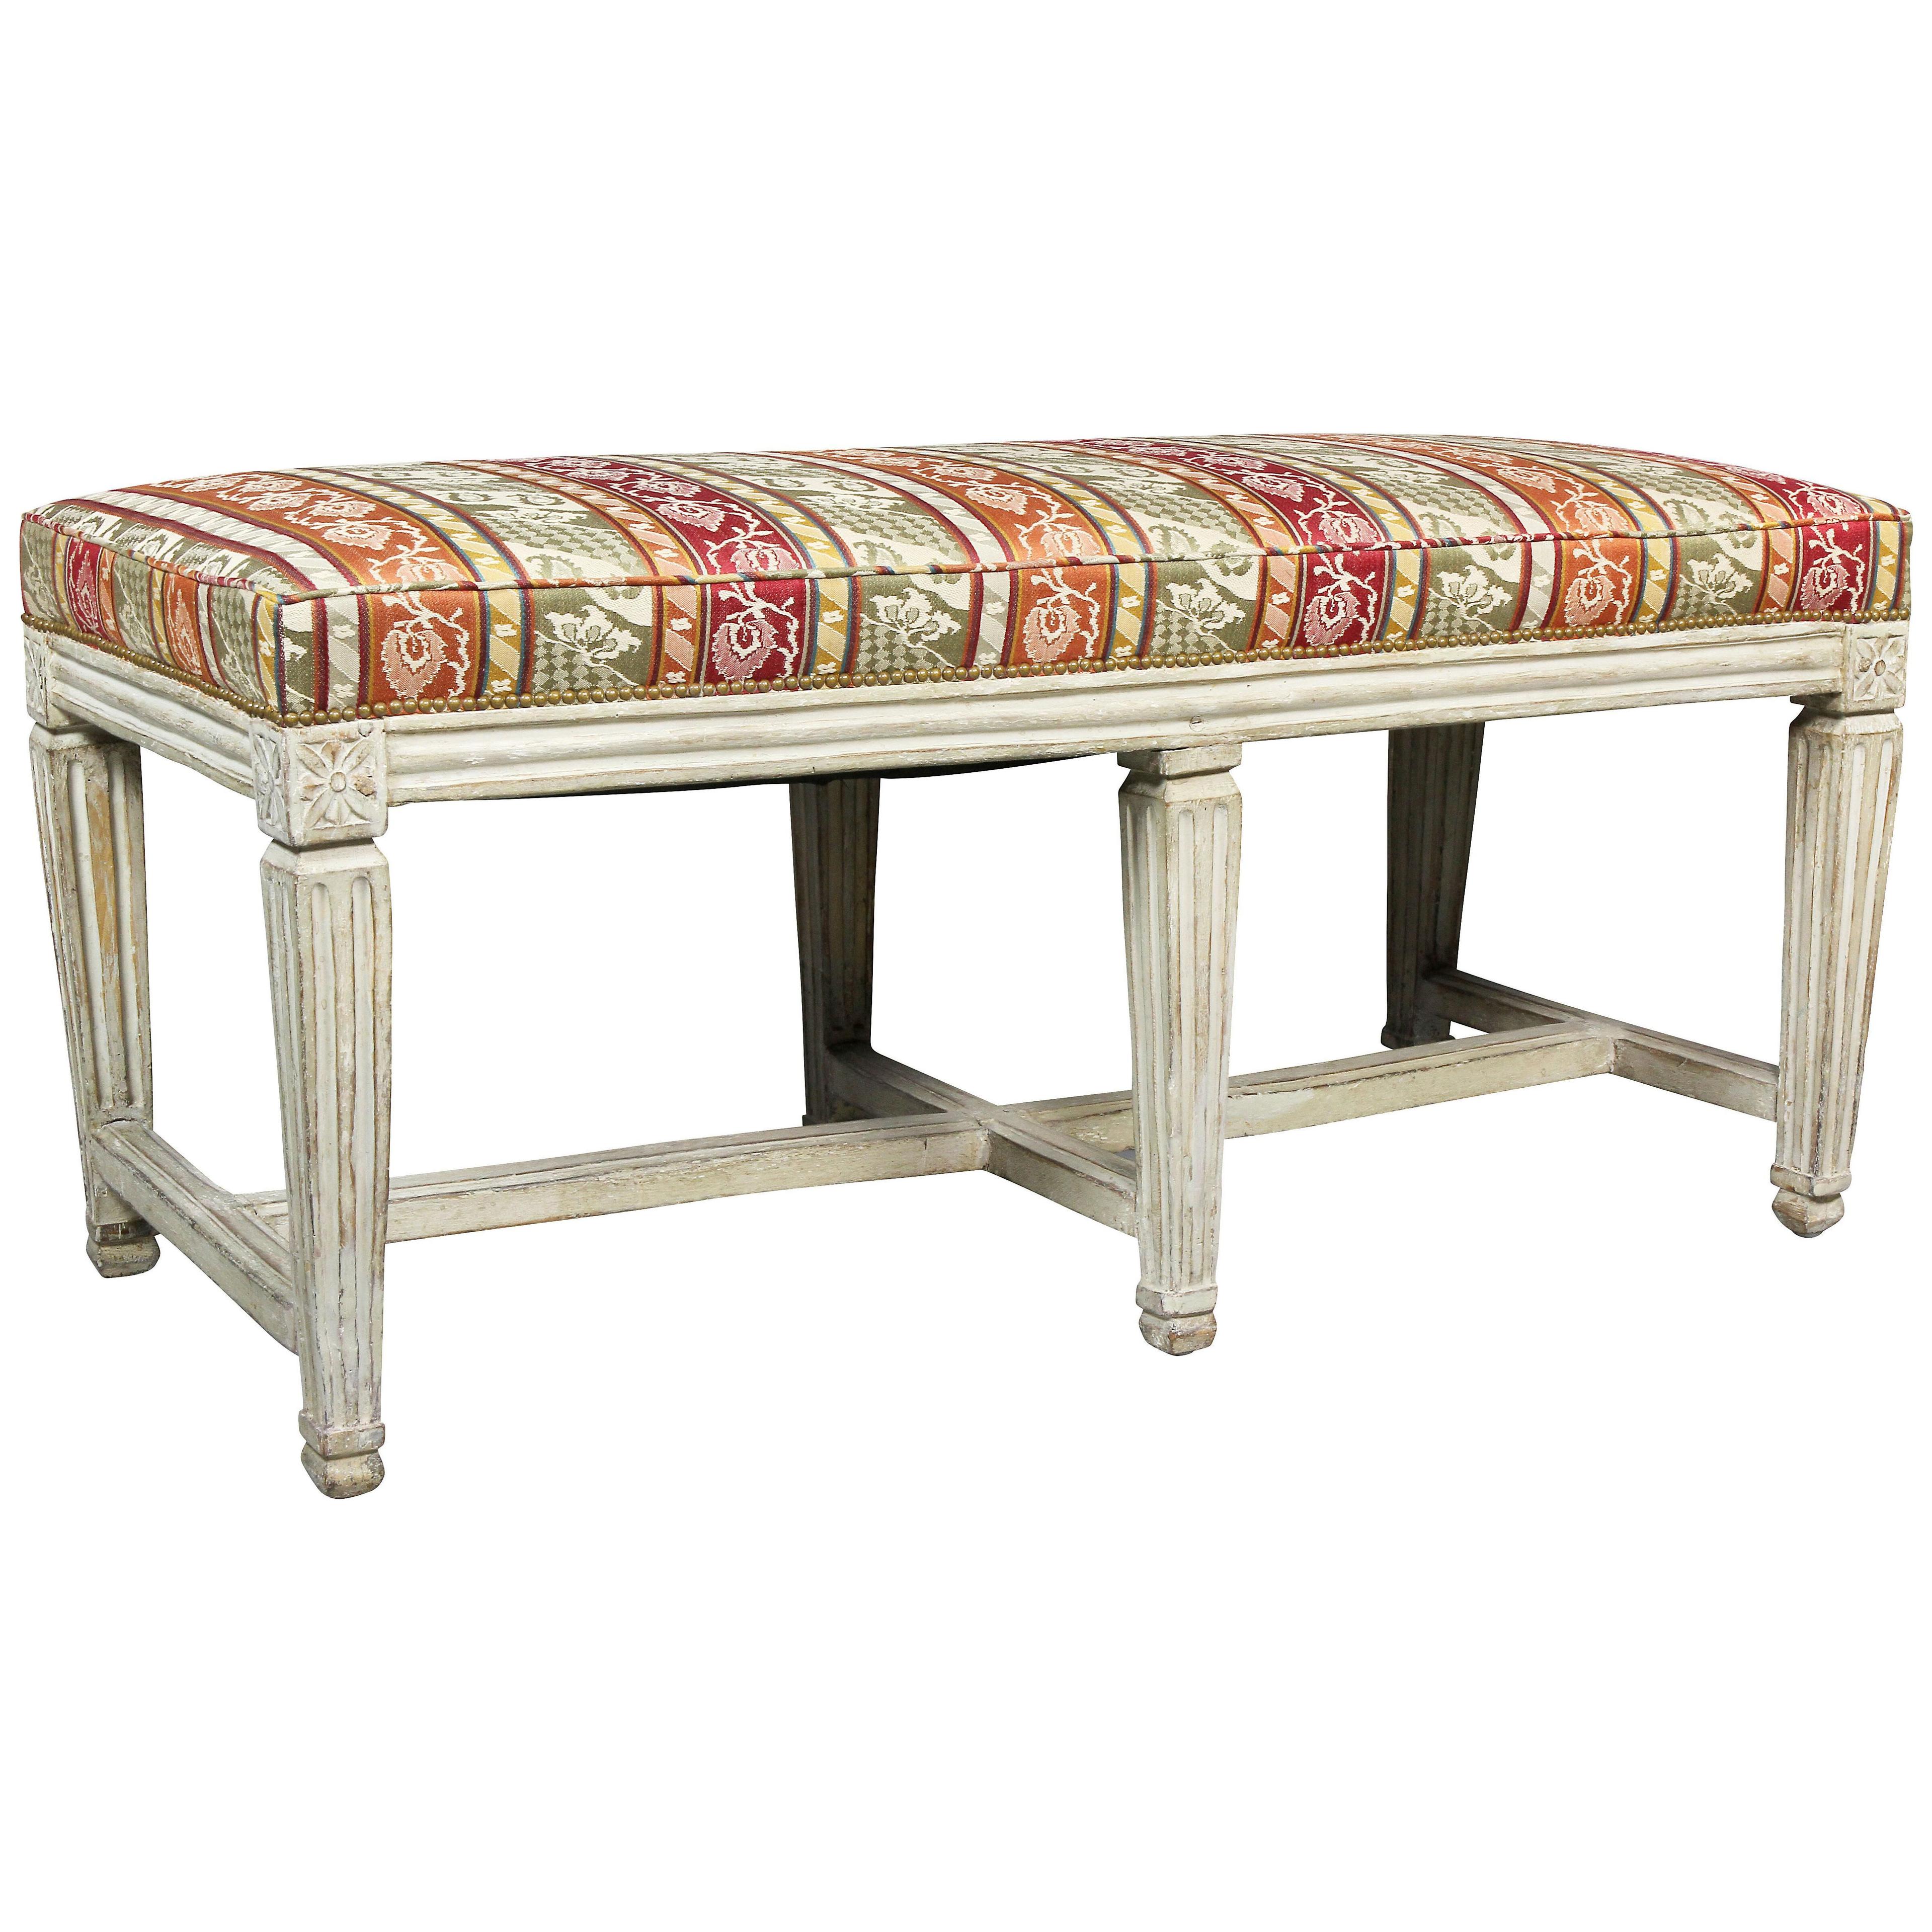 Early 19th Century Swedish Neoclassical White Painted Bench